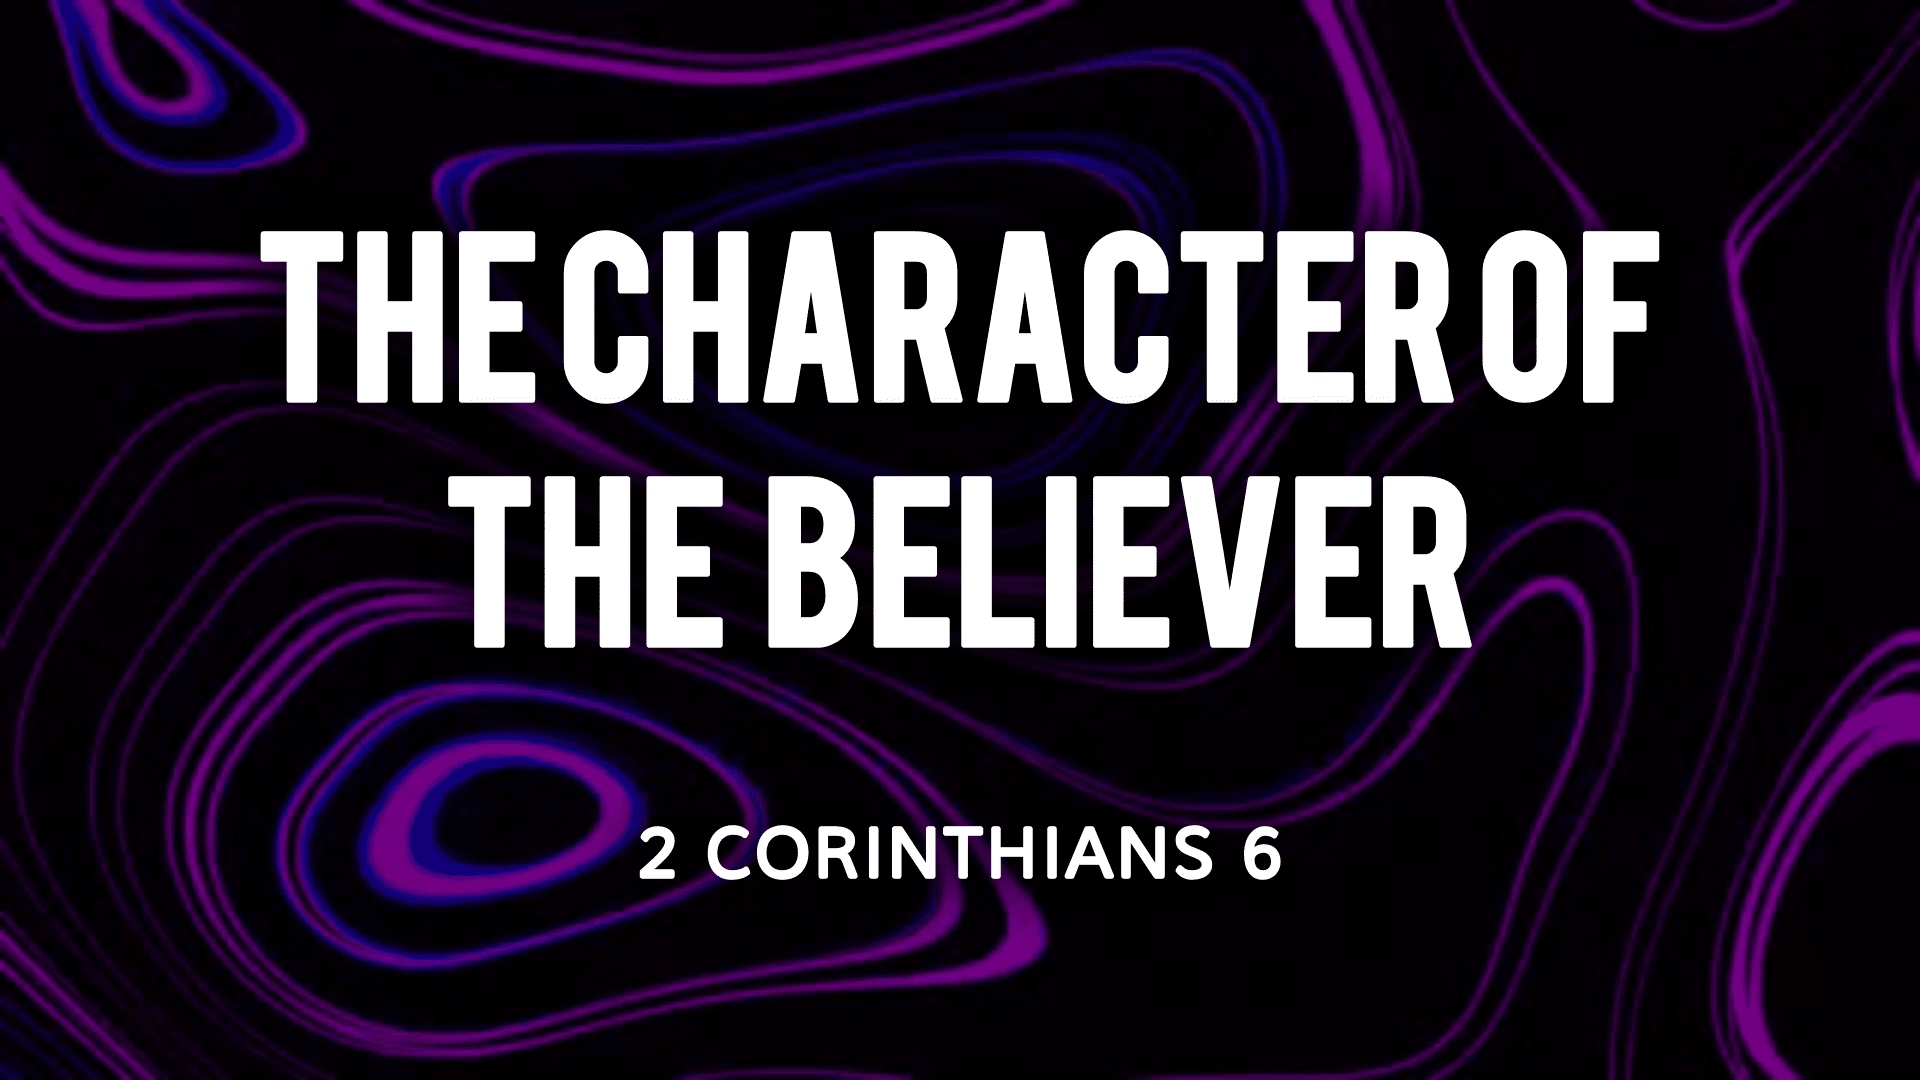 The Character Of The Believer